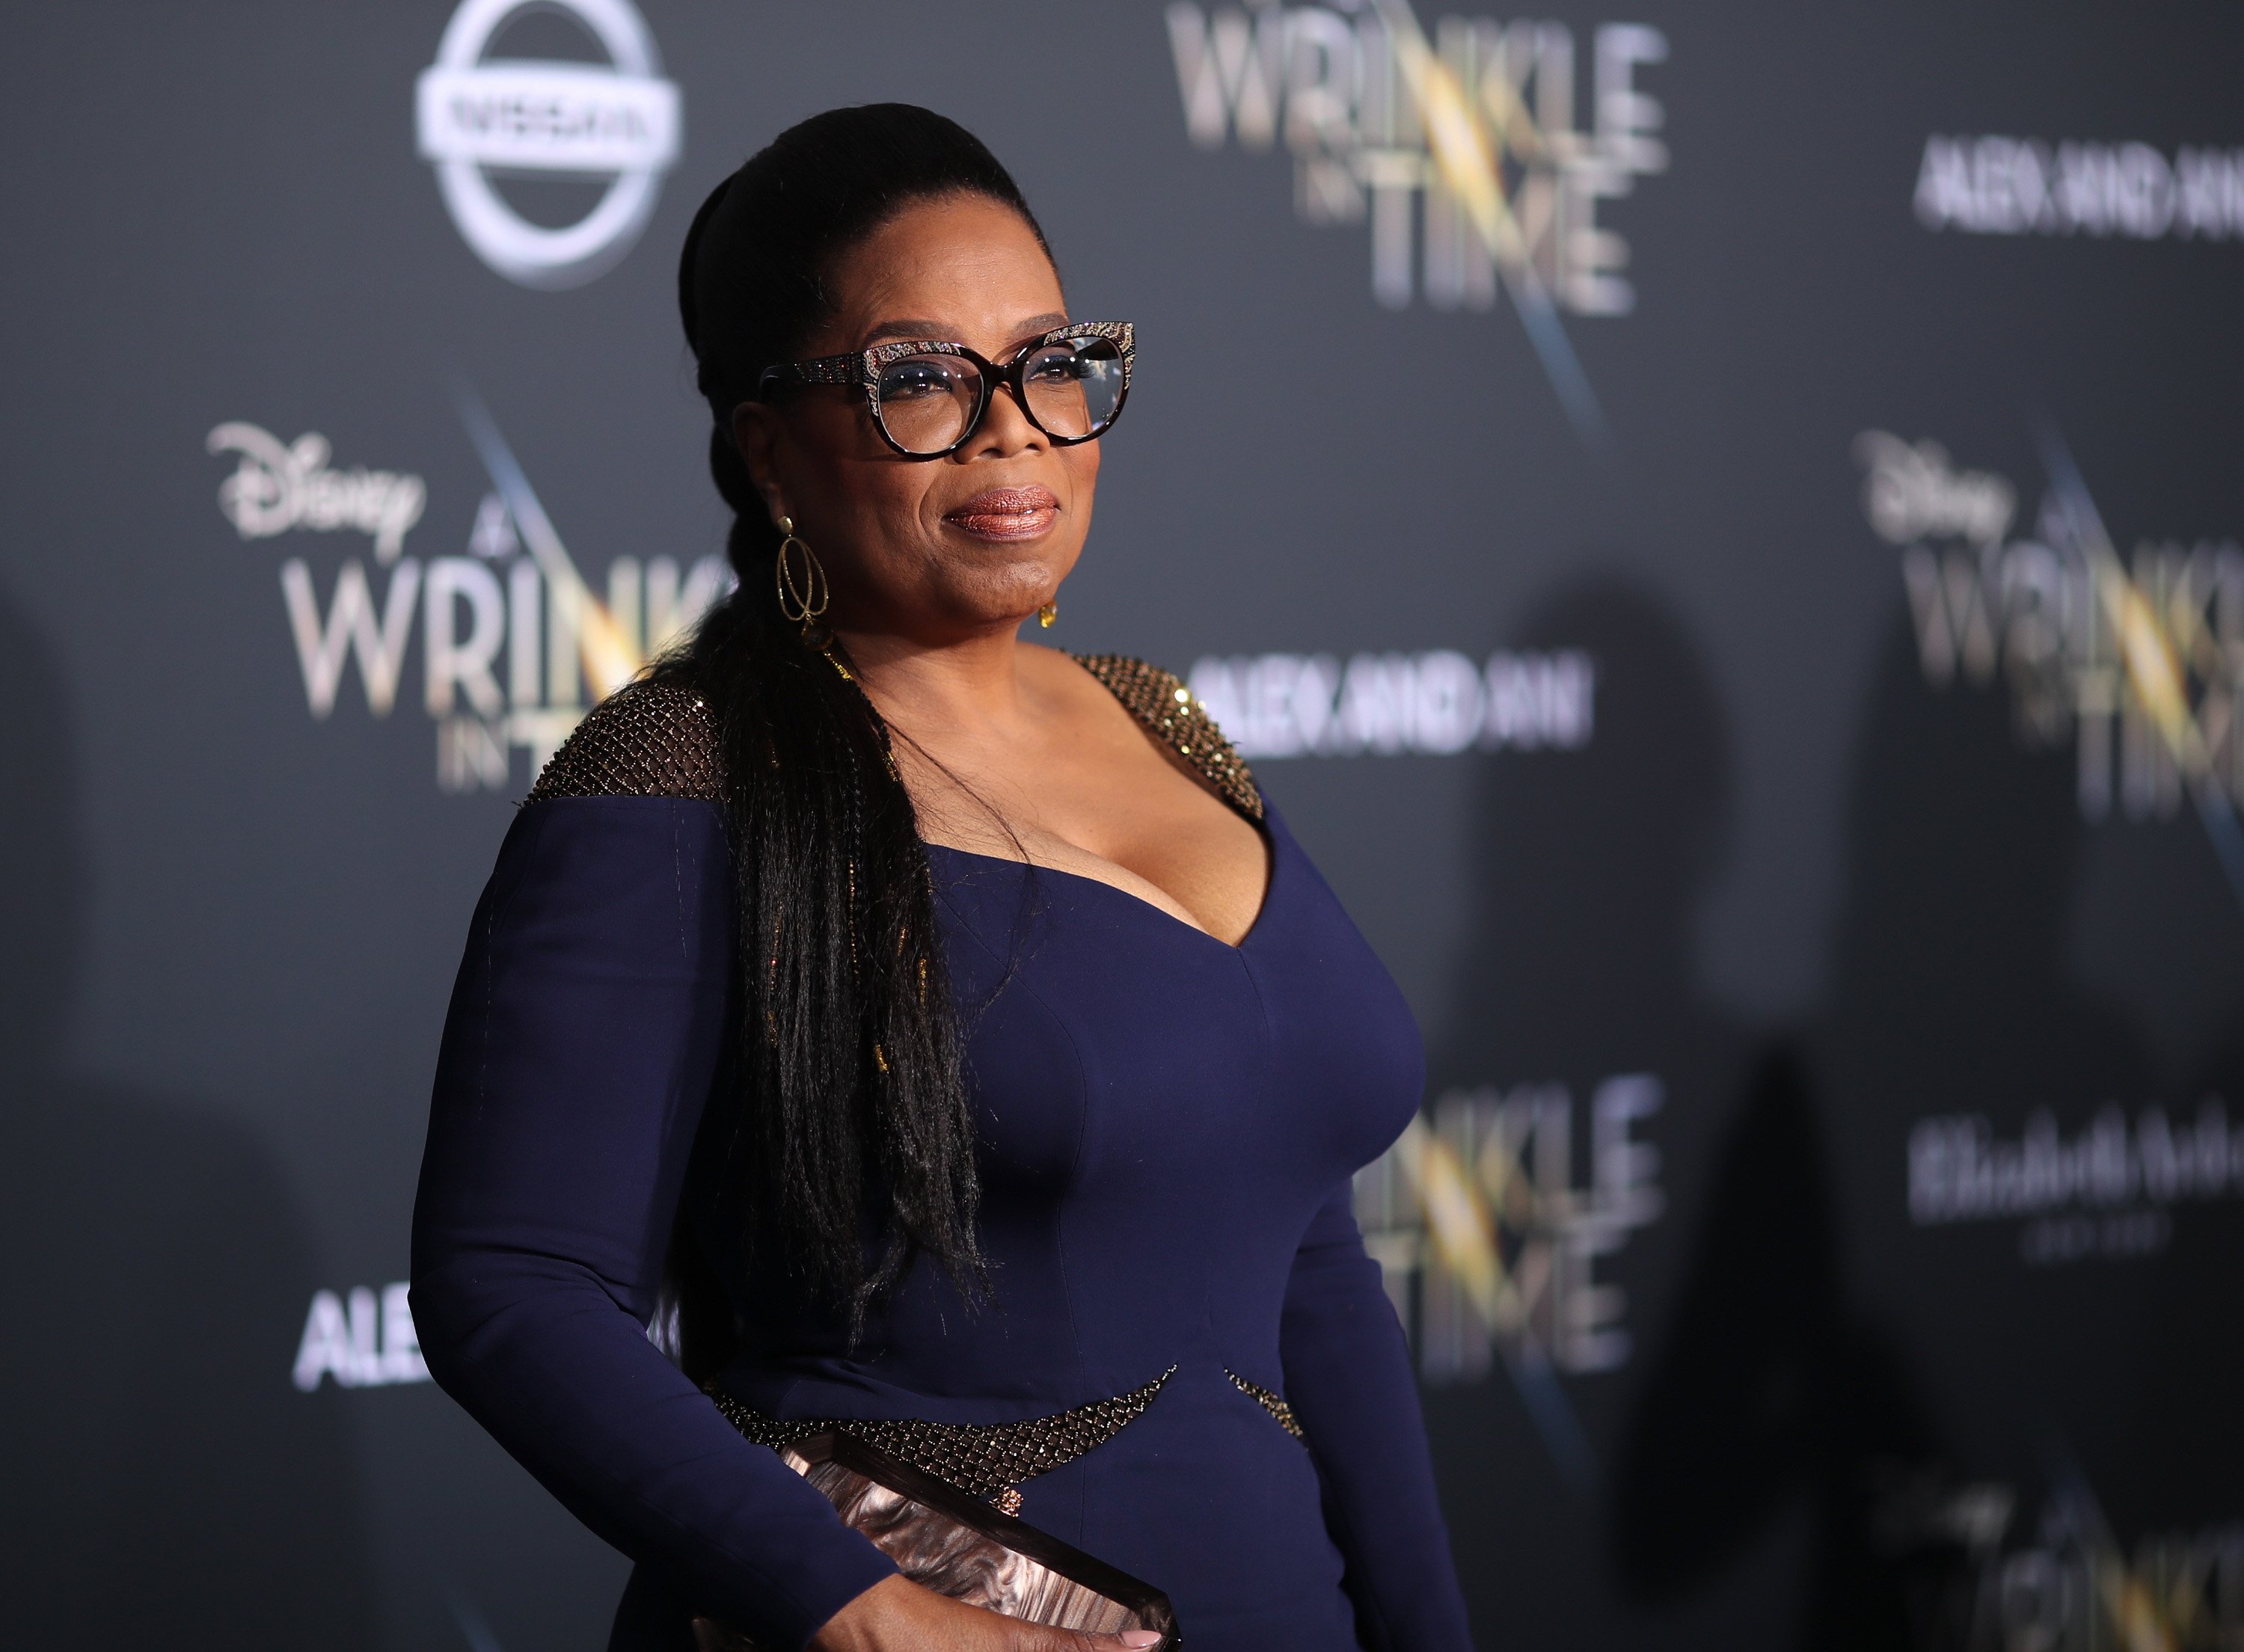  Oprah Winfrey attends the premiere of Disney's "A Wrinkle In Time" at the El Capitan Theatre on February 26, 2018 in Los Angeles, California | Photo: GettyImages